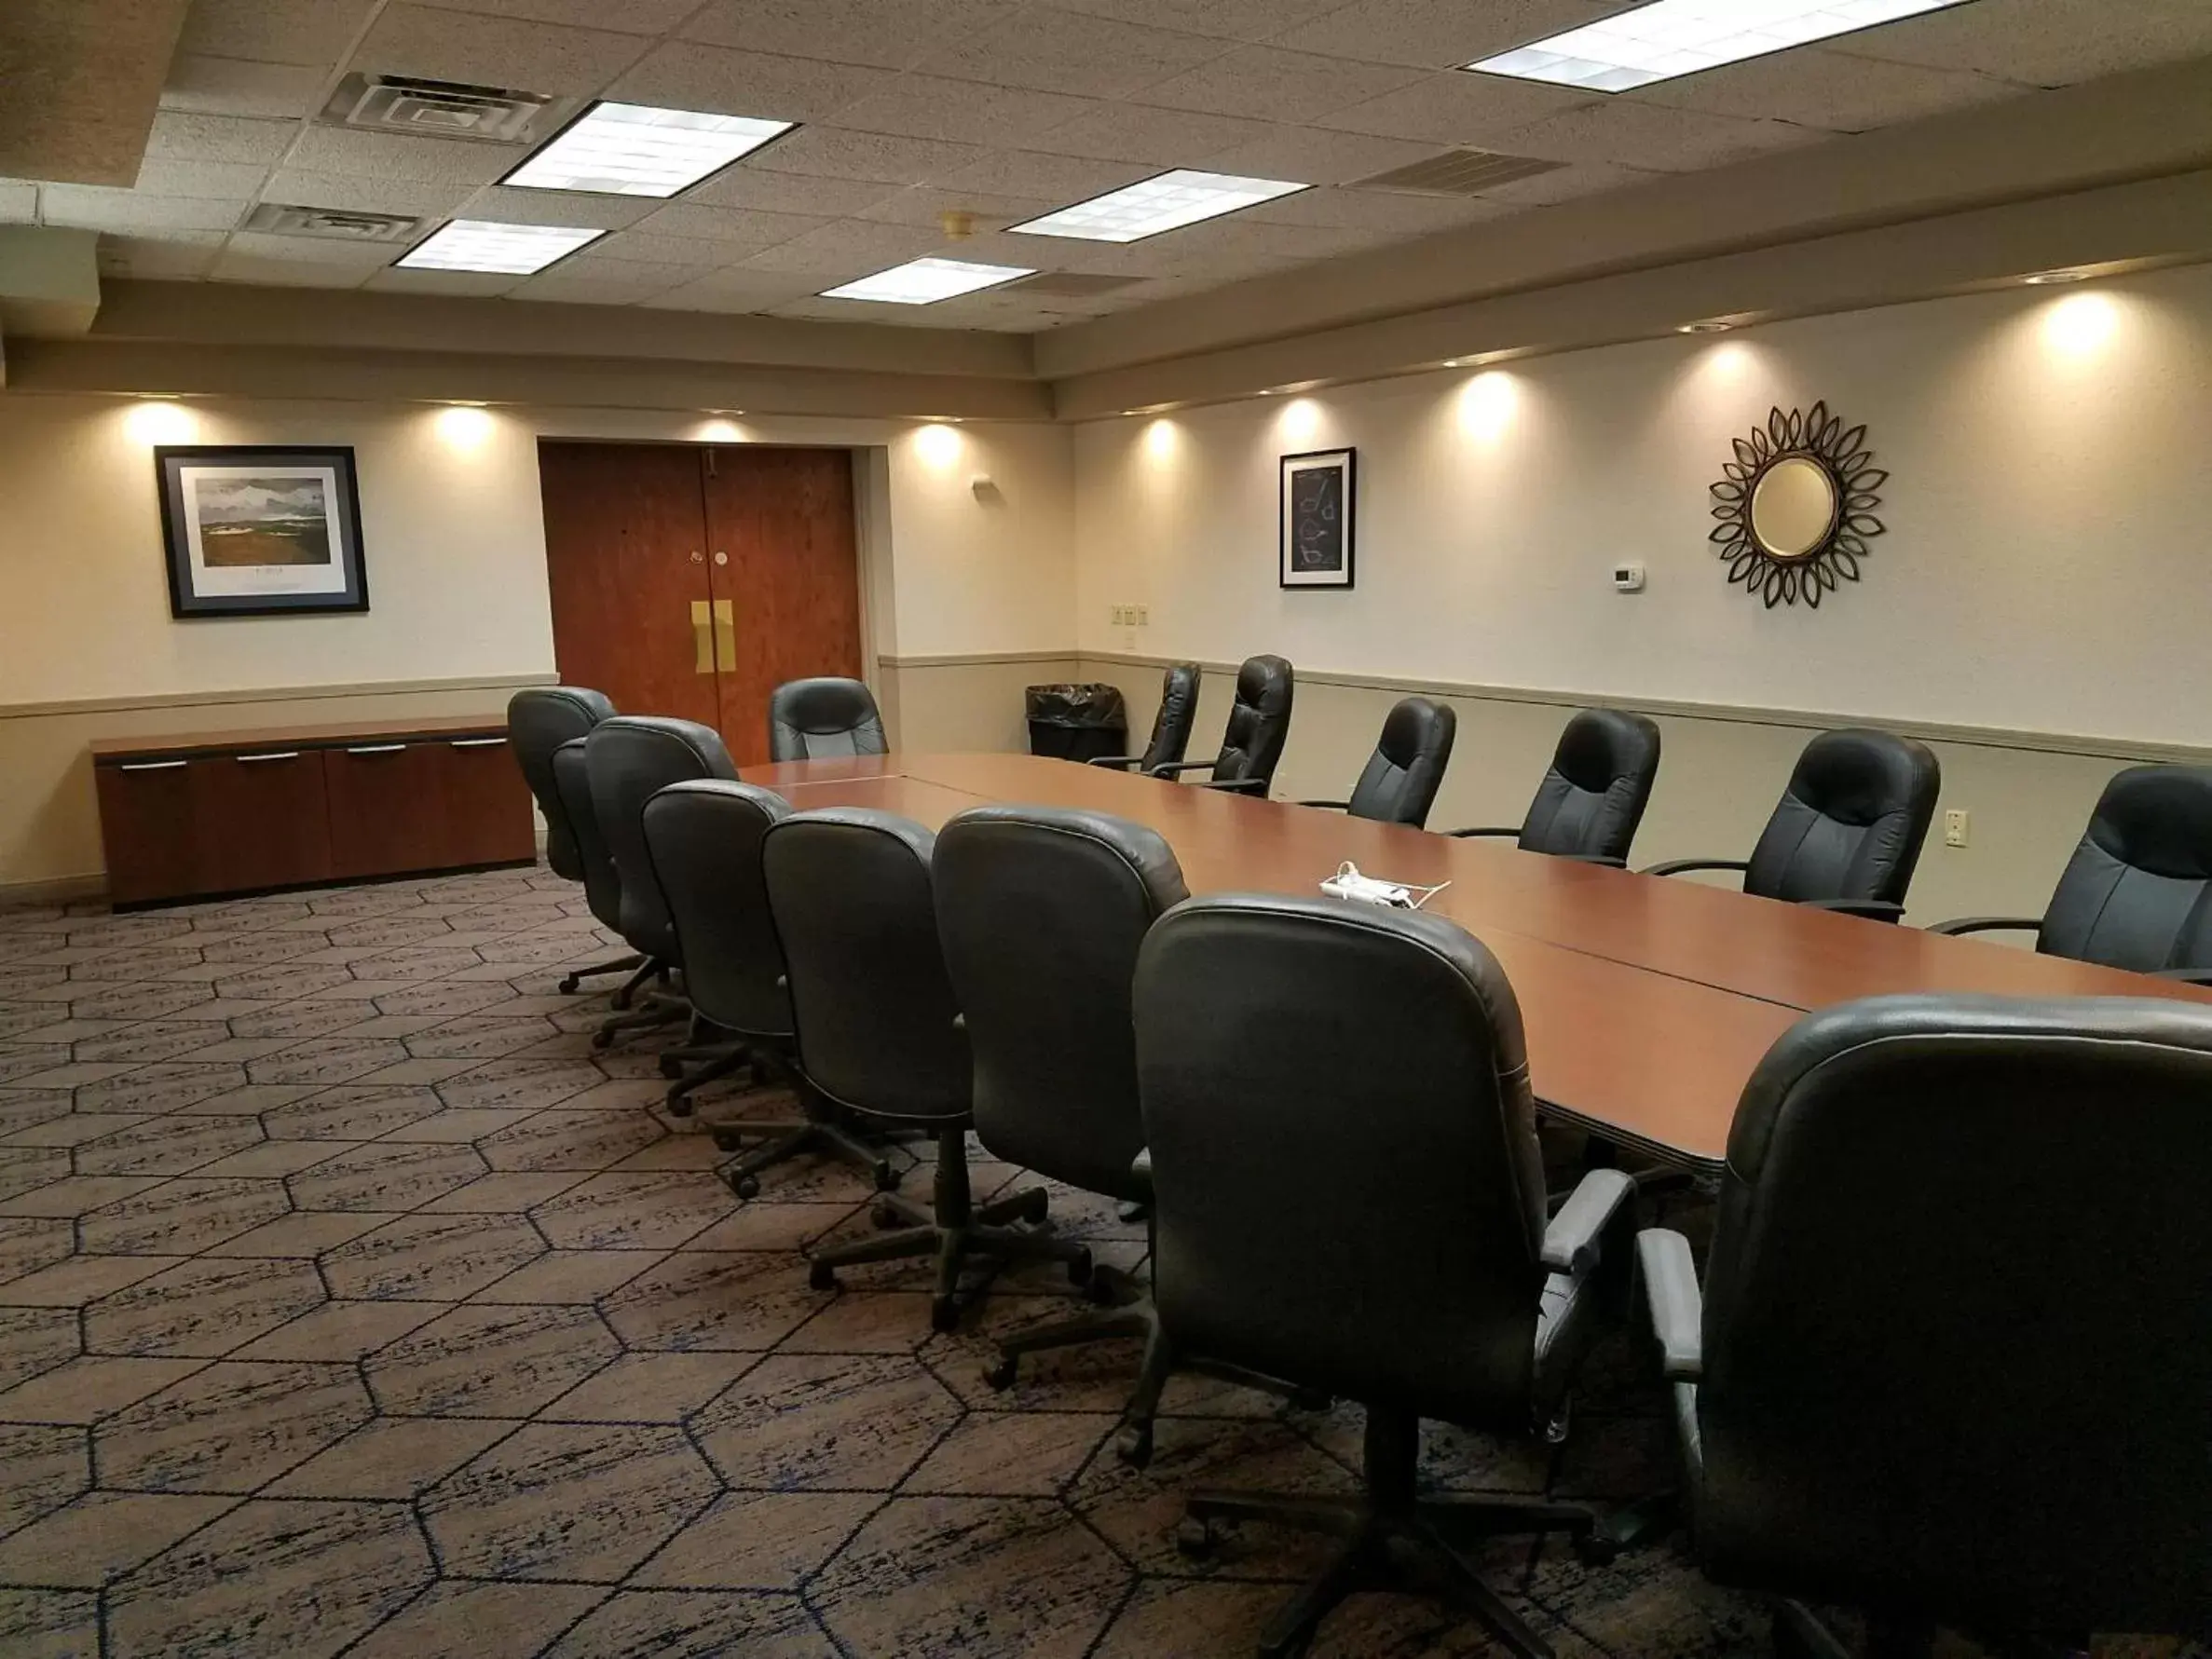 Business facilities in Arrowwood Resort and Conference Center